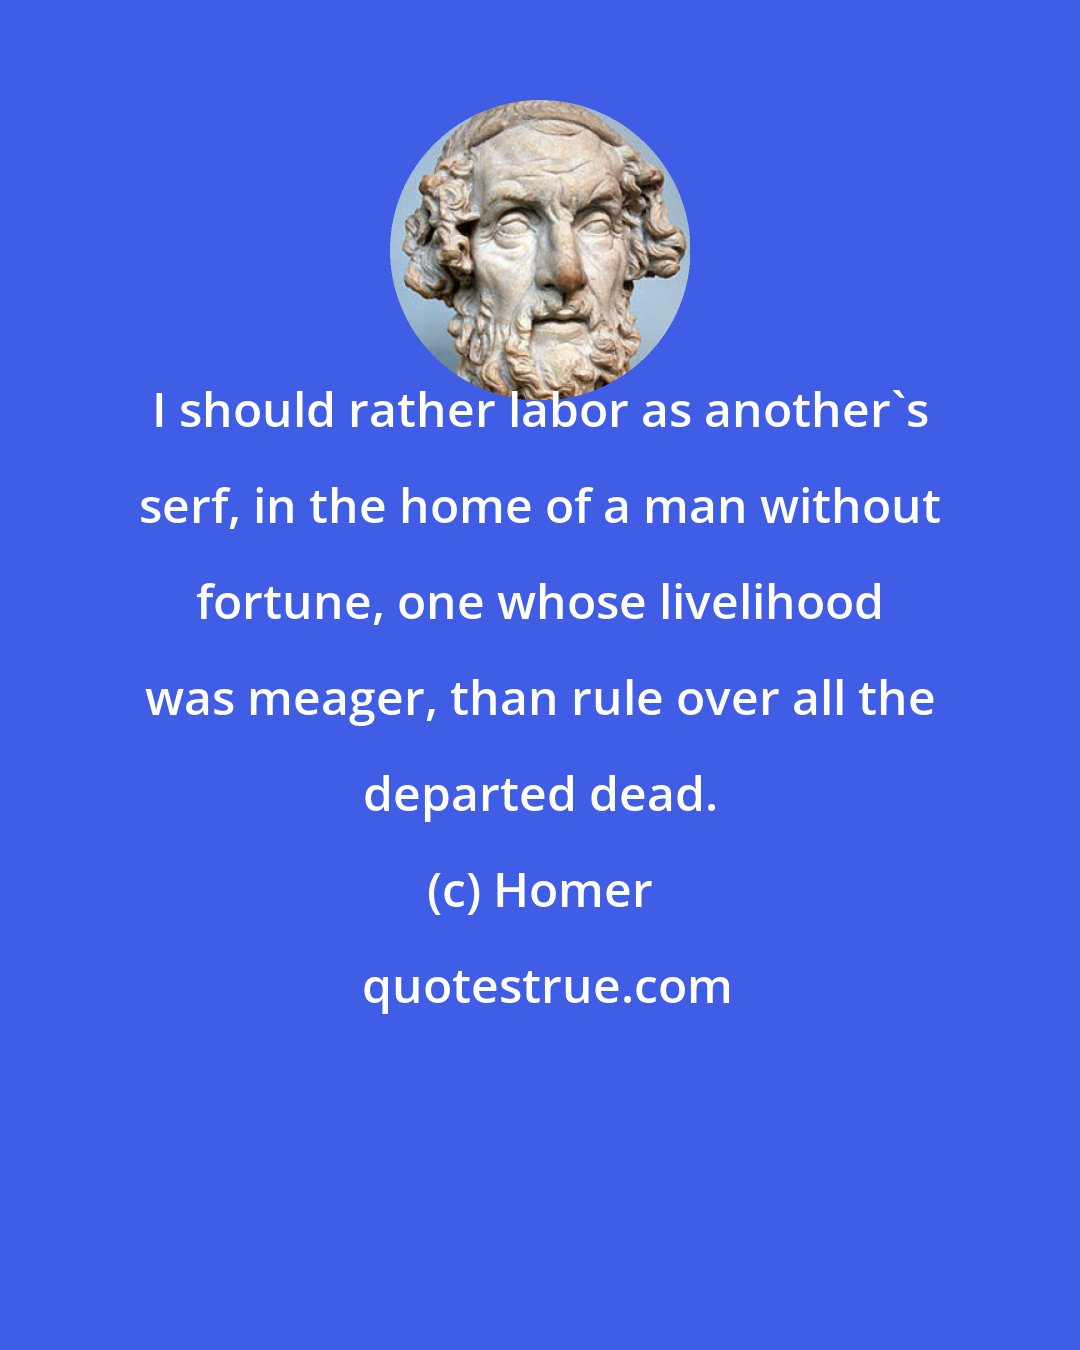 Homer: I should rather labor as another's serf, in the home of a man without fortune, one whose livelihood was meager, than rule over all the departed dead.